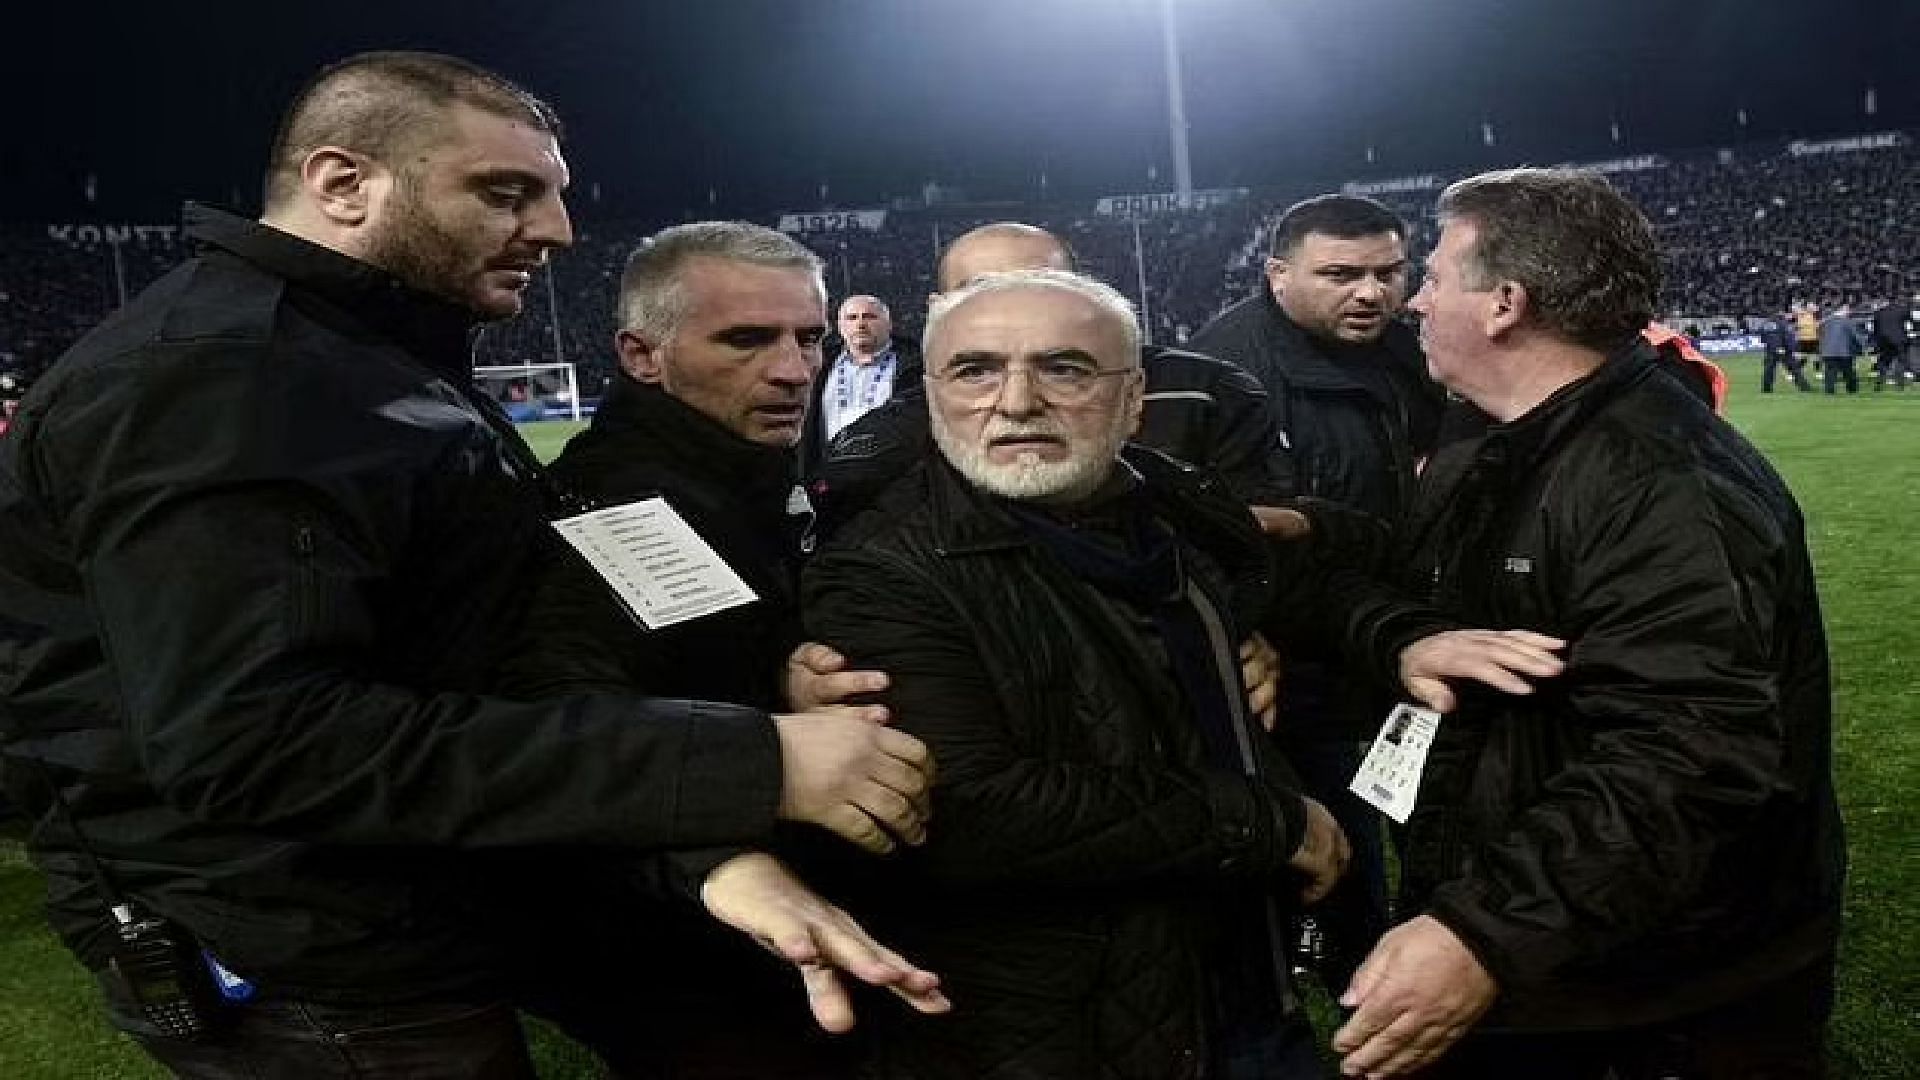 Ivan Savvidis, president of PAOK Salonika, took his rage to a new level during a match against AEK Athens back in March 2018.